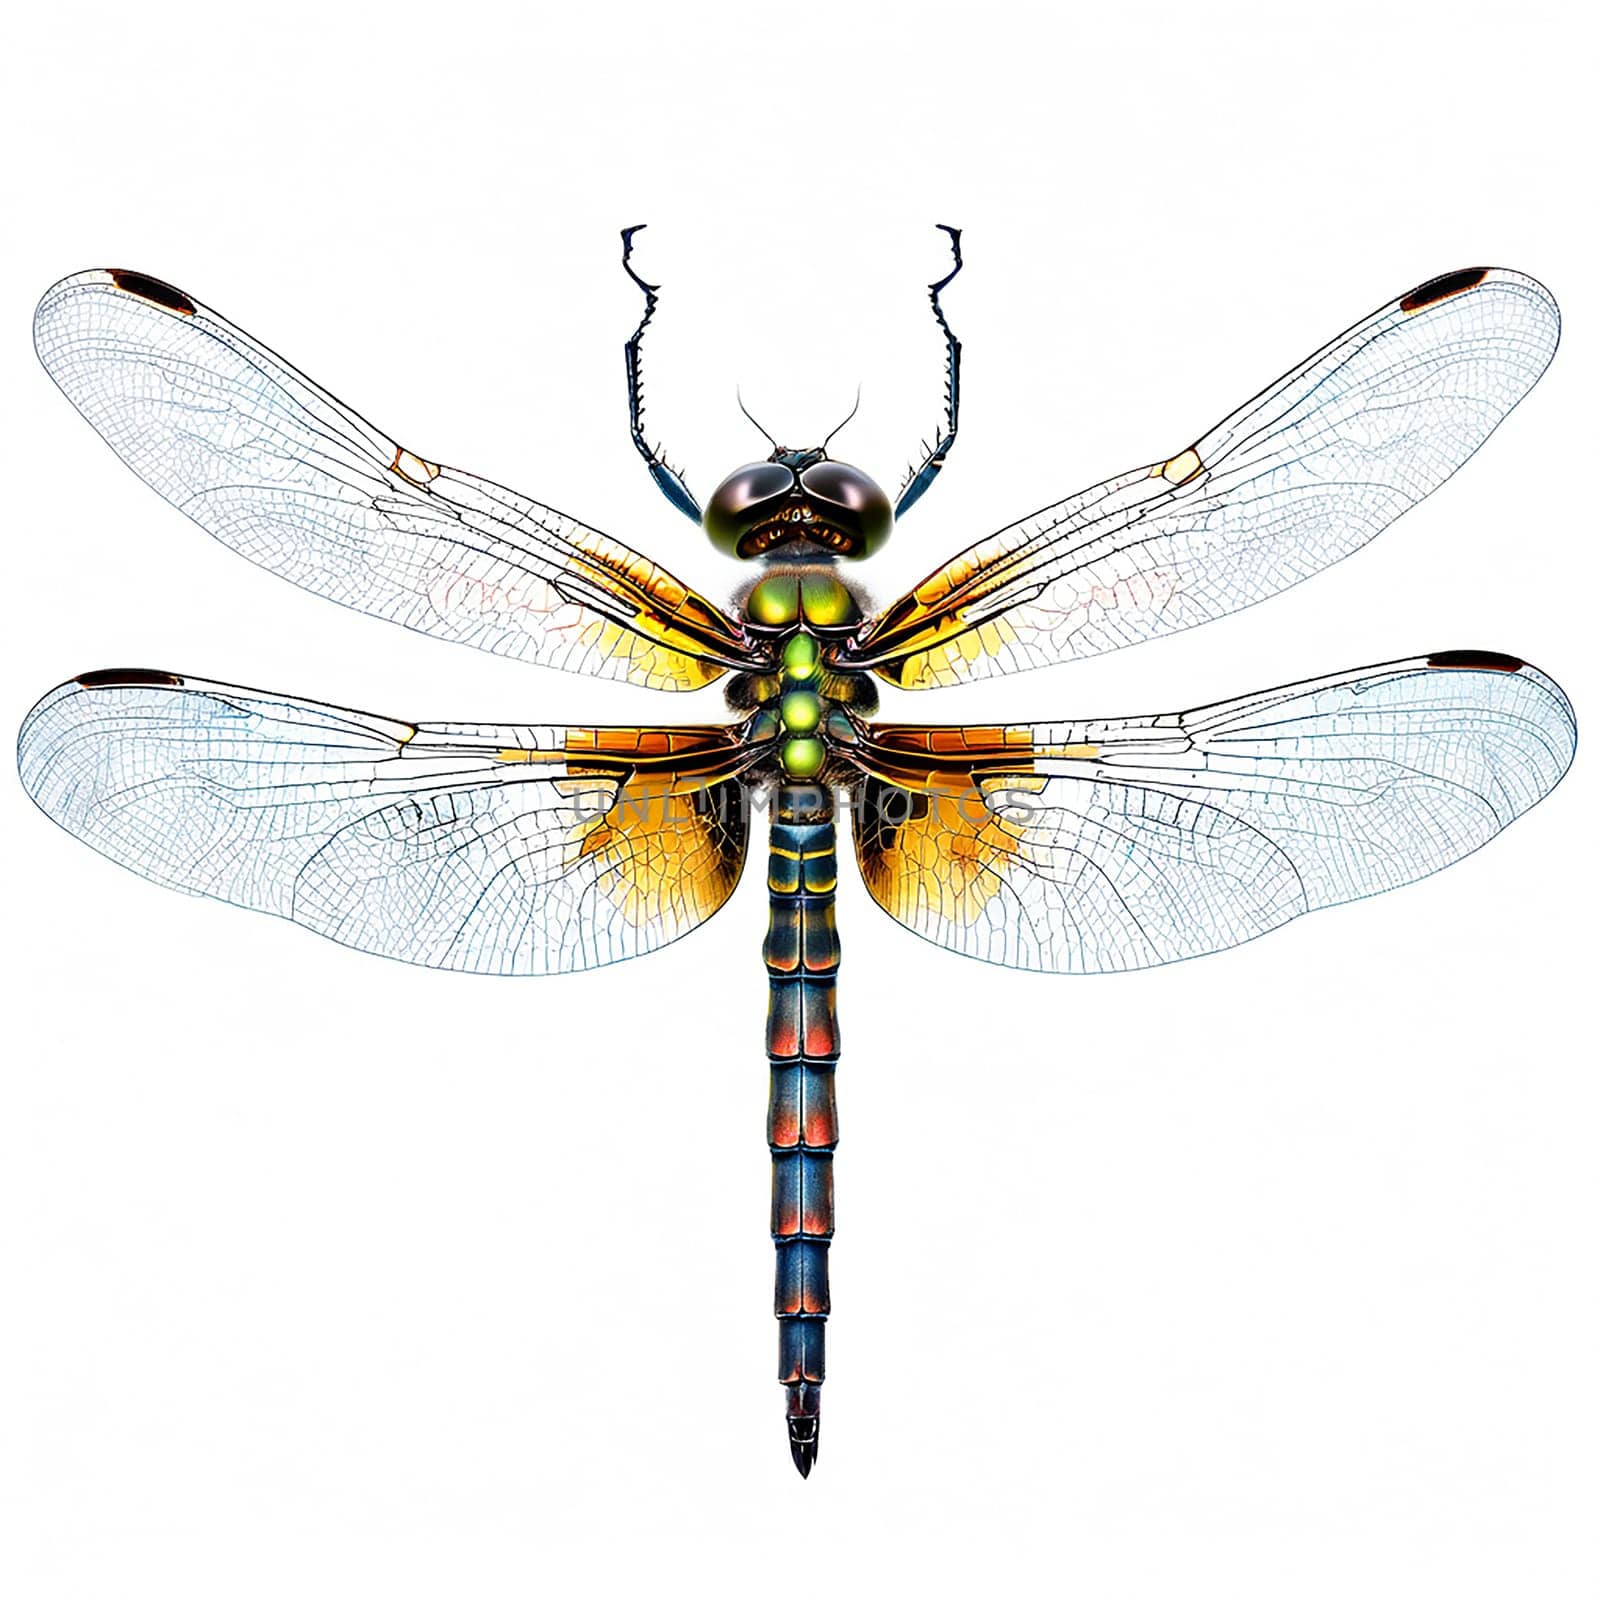 Nature's Aviators: The Graceful Flight of Insects by Petrichor